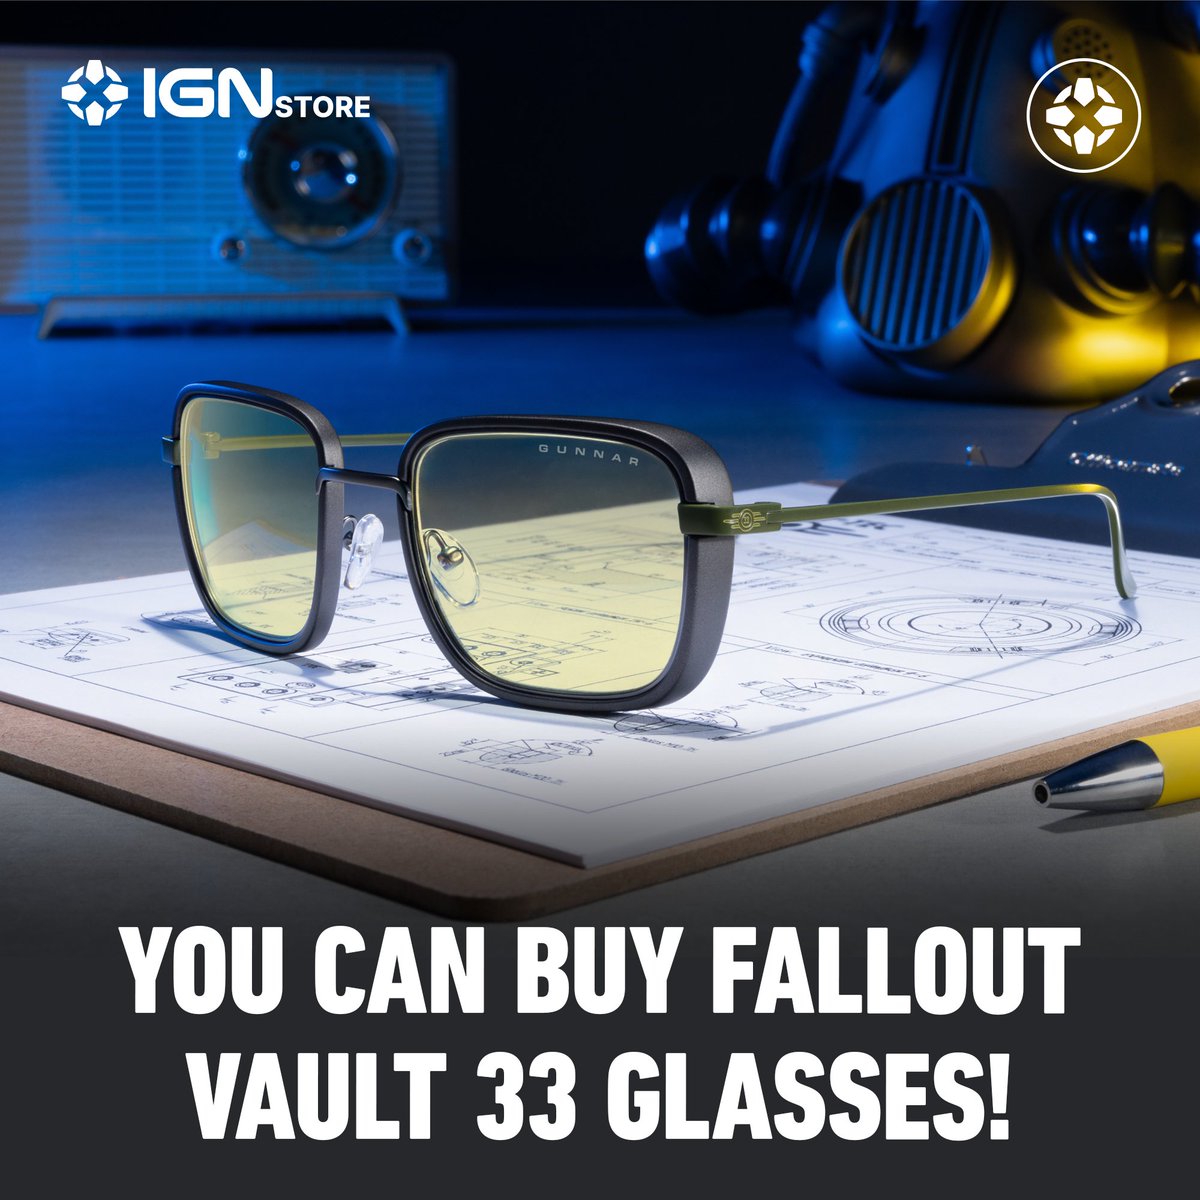 Please stand by... equip your Pip-Boy and return to the post-apocalyptic ’40s-flavored world of Fallout® with the exclusive Amazon Studios’® Fallout Vault 33 glasses, now available at the IGN Store. store.ign.com/products/fallo…